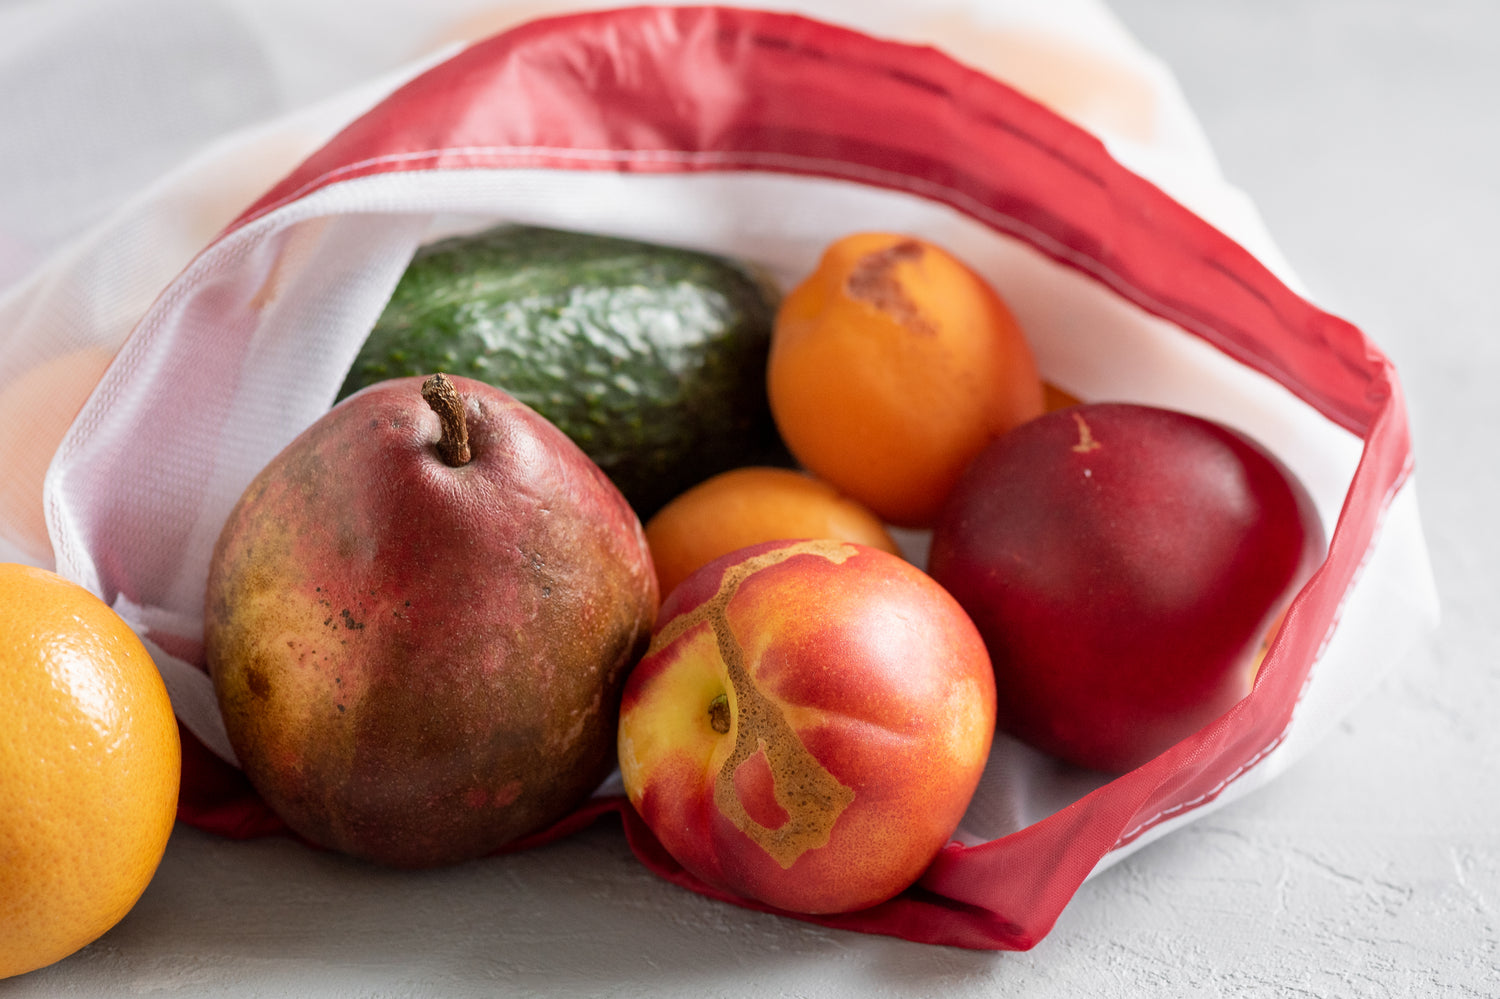 imperfect fruit spilling out of grocery bag